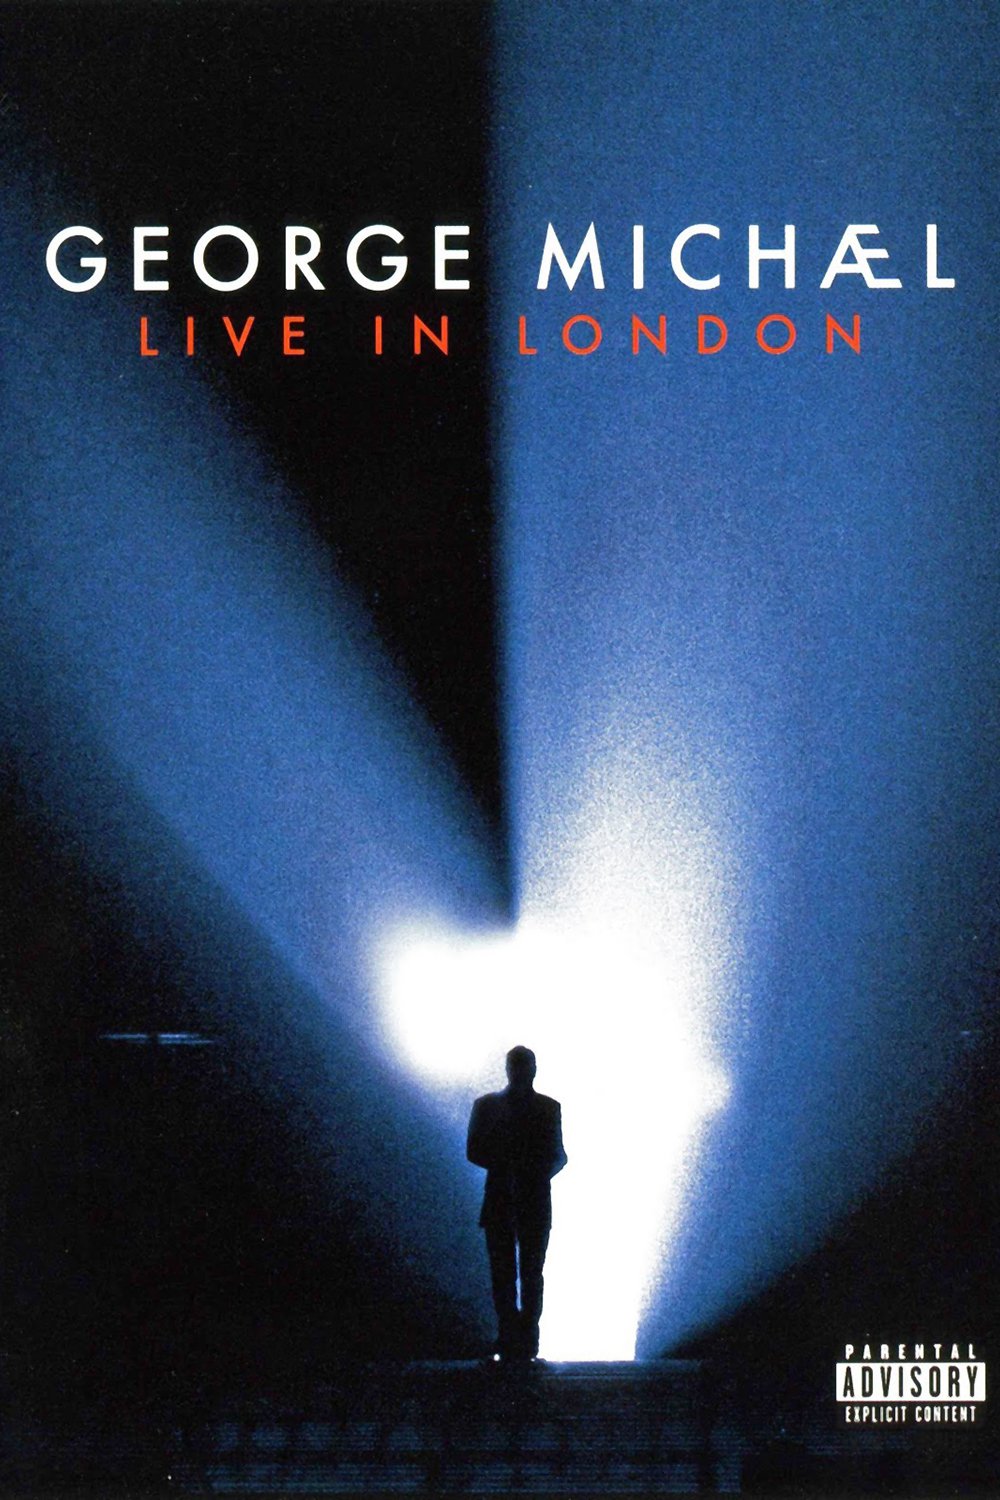 George Michael Live in London